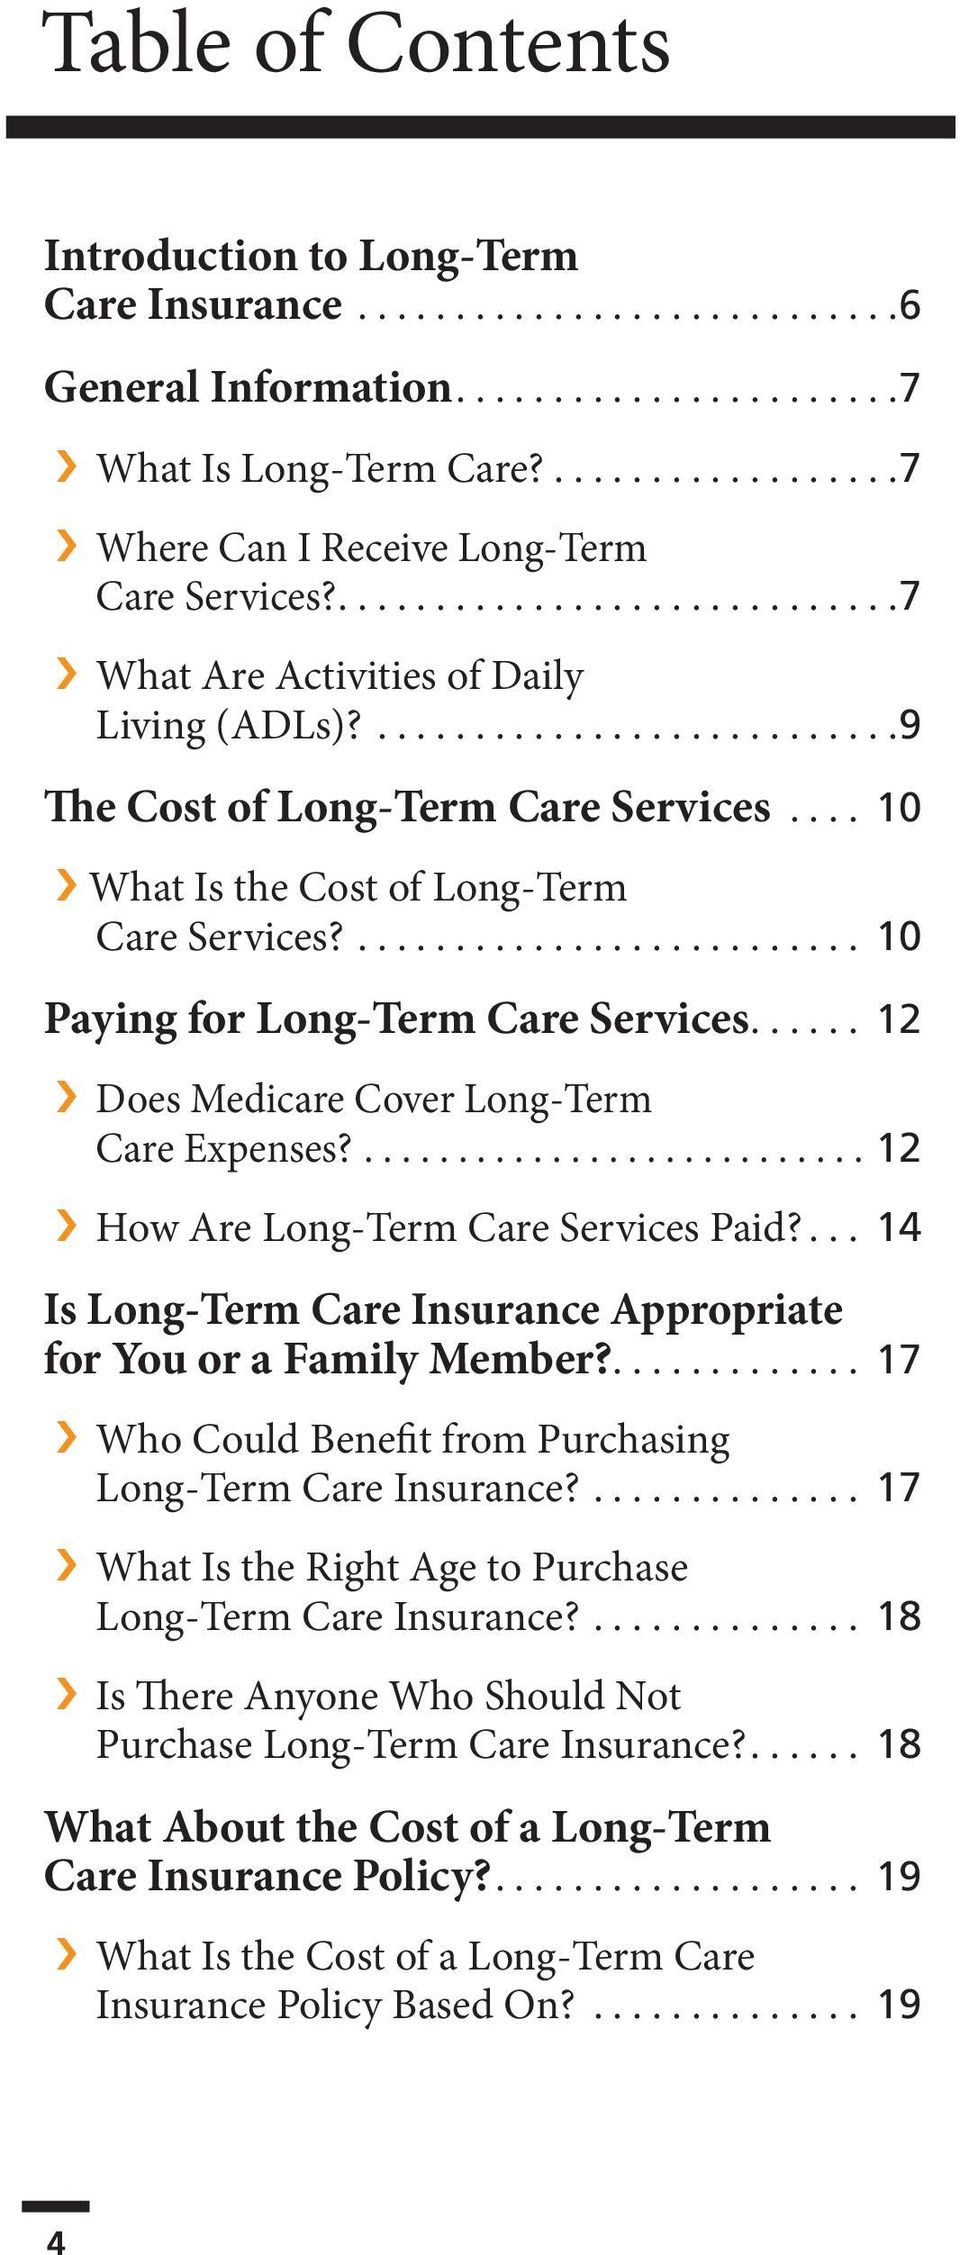 ... 10 What Is the Cost of Long-Term Care Services?.......................... 10 Paying for Long-Term Care Services...... 12 Does Medicare Cover Long-Term Care Expenses?